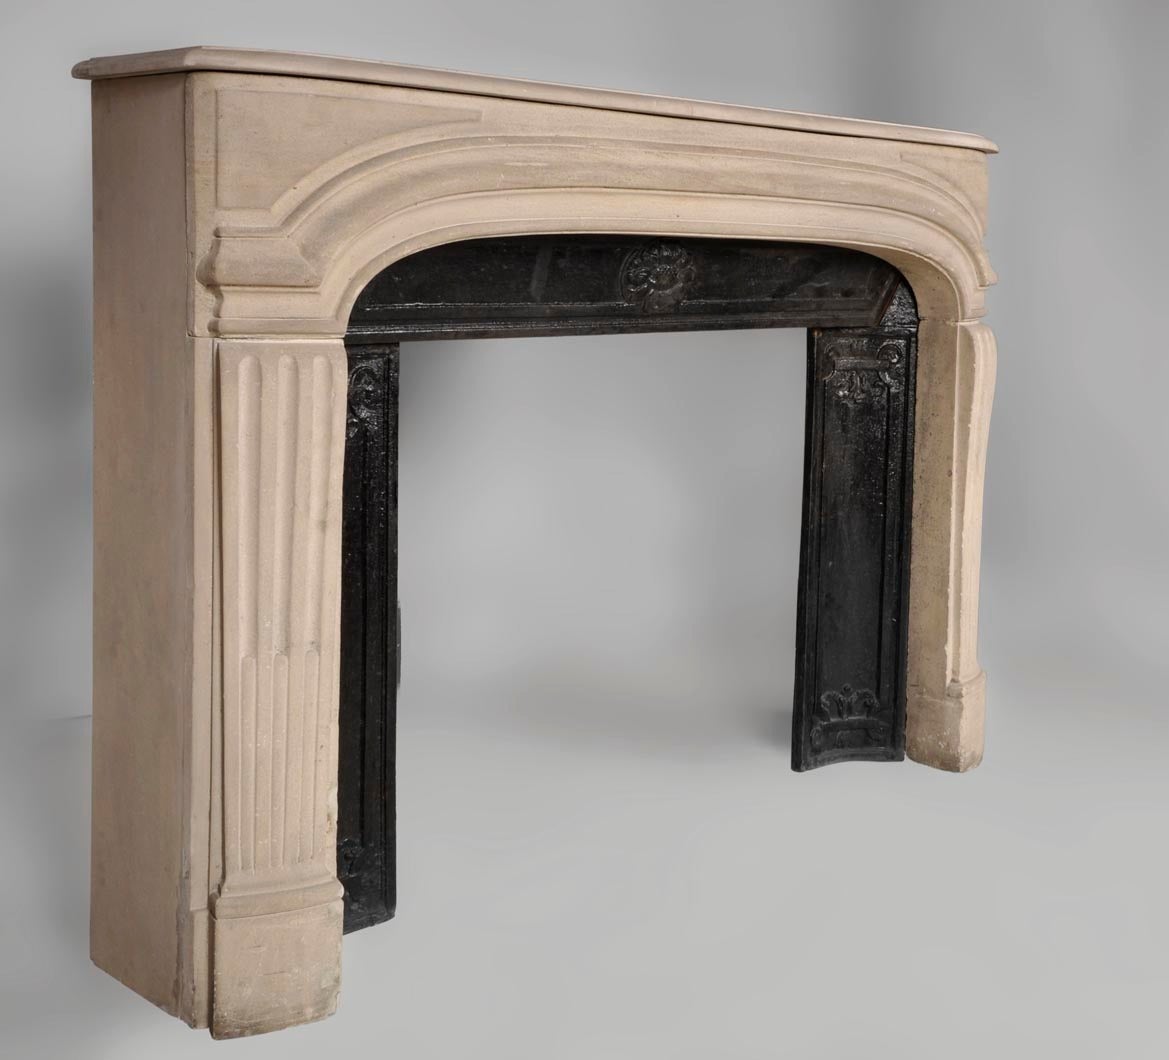 This fireplace comes with its original cast iron insert made in three parts.